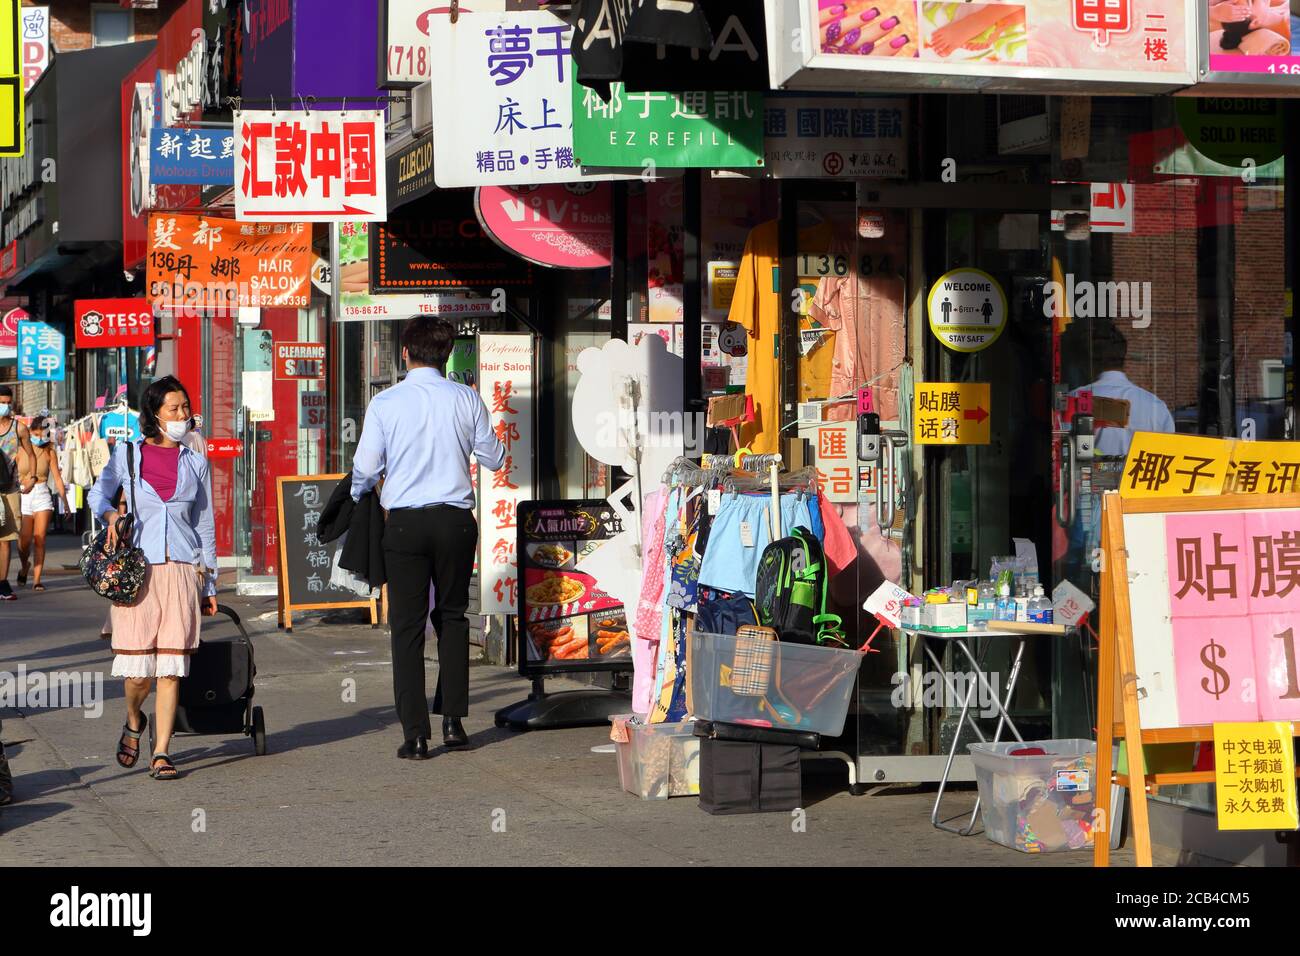 Asian storefronts and signage along Roosevelt Ave in Downtown Flushing, New York, NY. Stock Photo